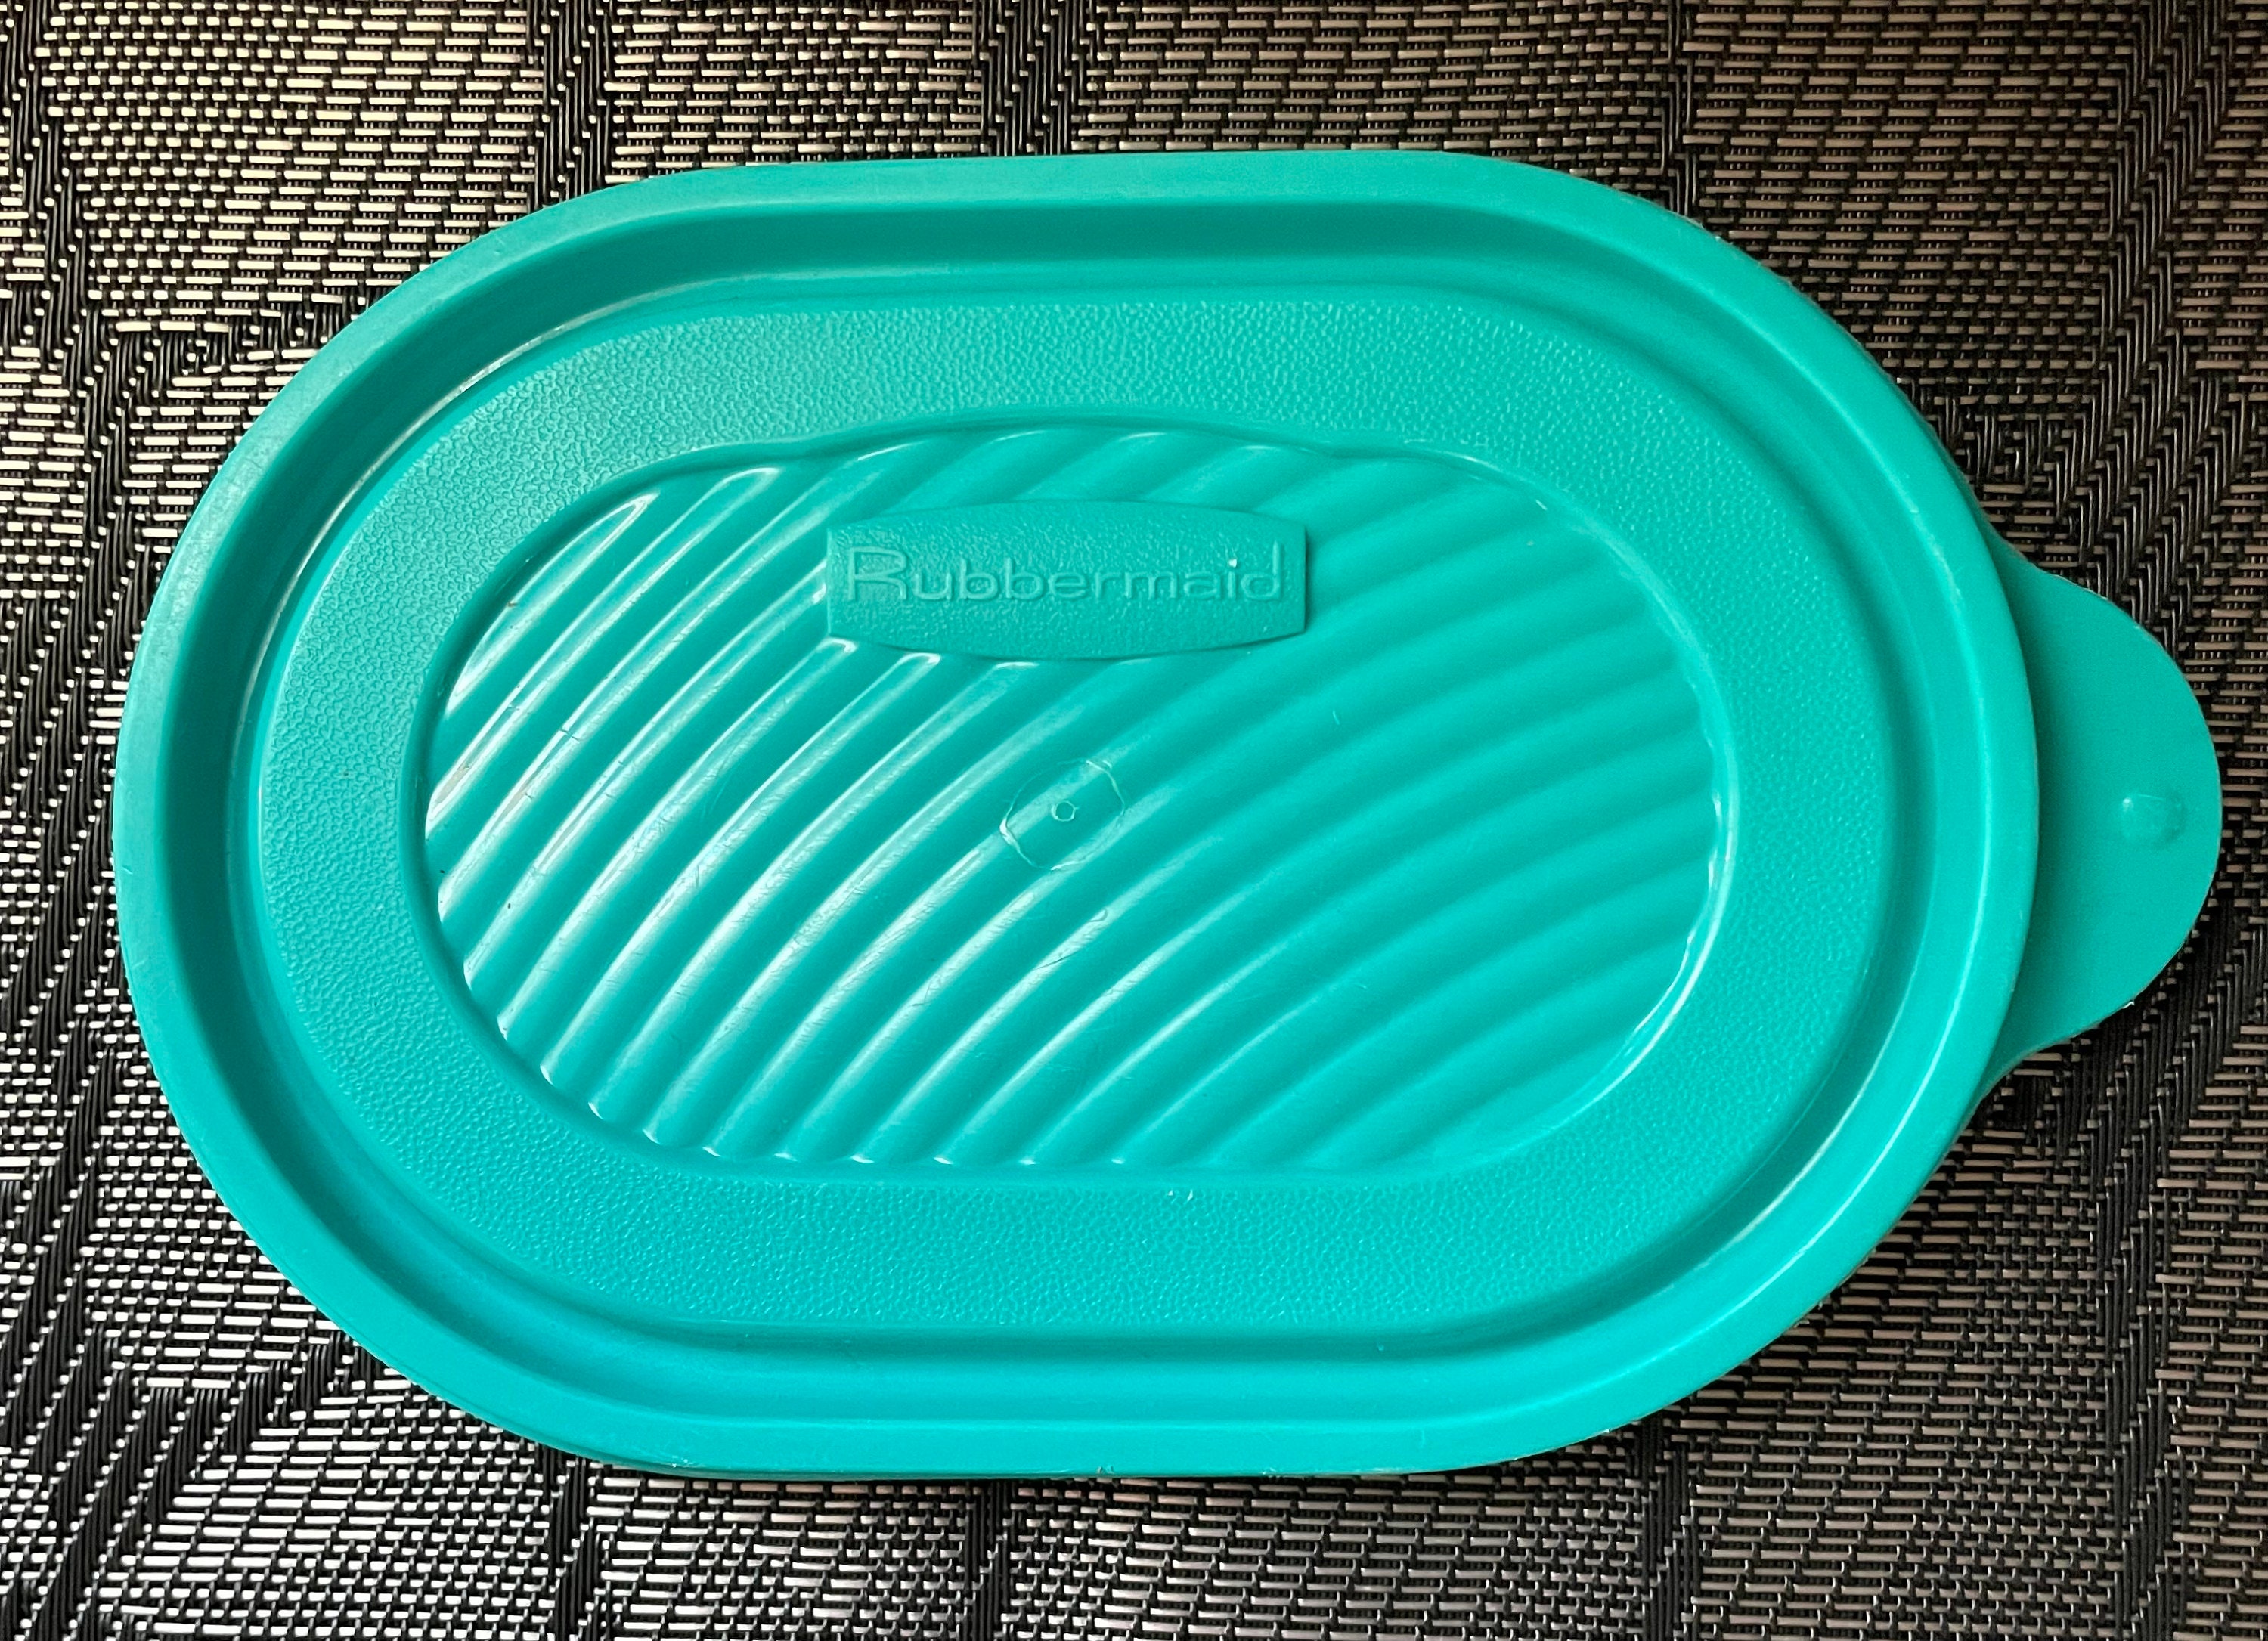 Rubbermaid Servin Saver Easy Tab Blue Covers or Containers With EZ